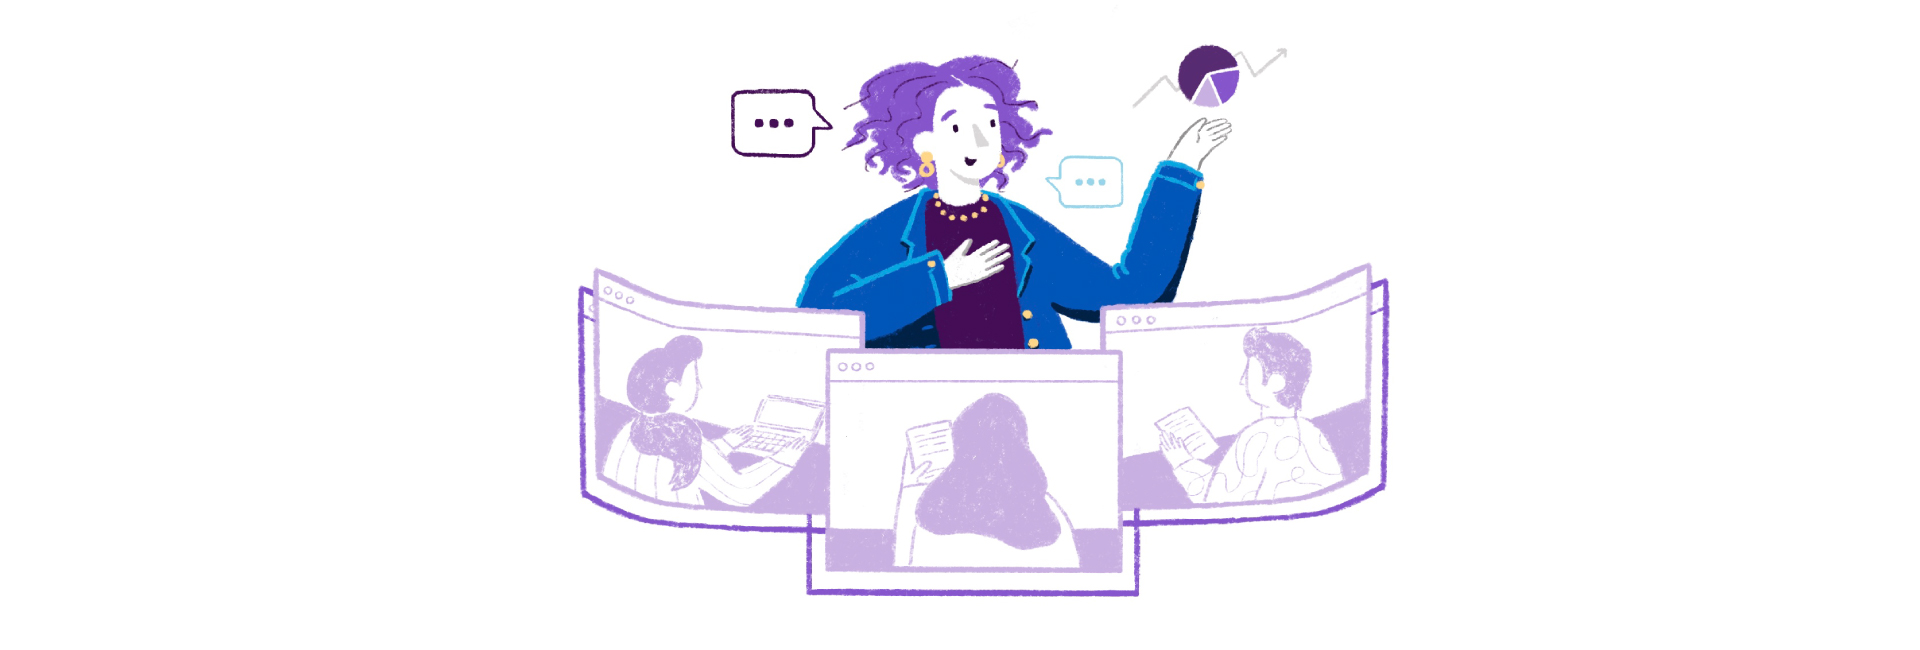 Illustration of woman talking about graph to people on screens